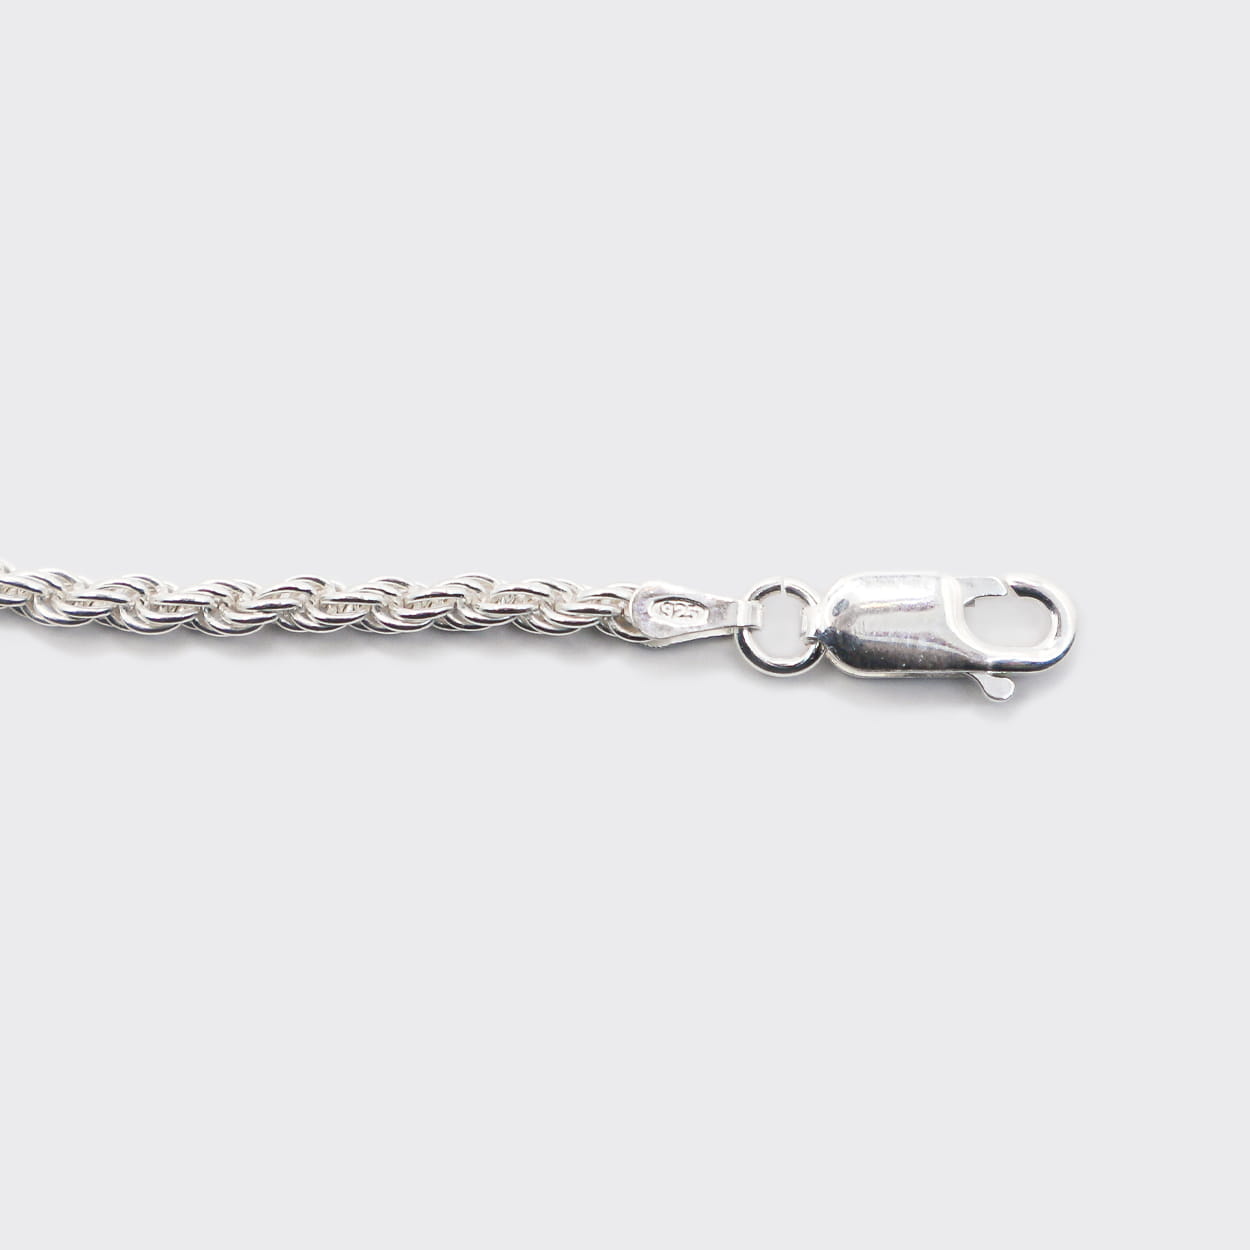 The Rope bracelet is an elegant and unisex piece of jewelry, crafted in Italy and made of 925 Sterling Silver. Every jewelry is designed by Atelier Domingo's in France and is made to be worn by both men and women.